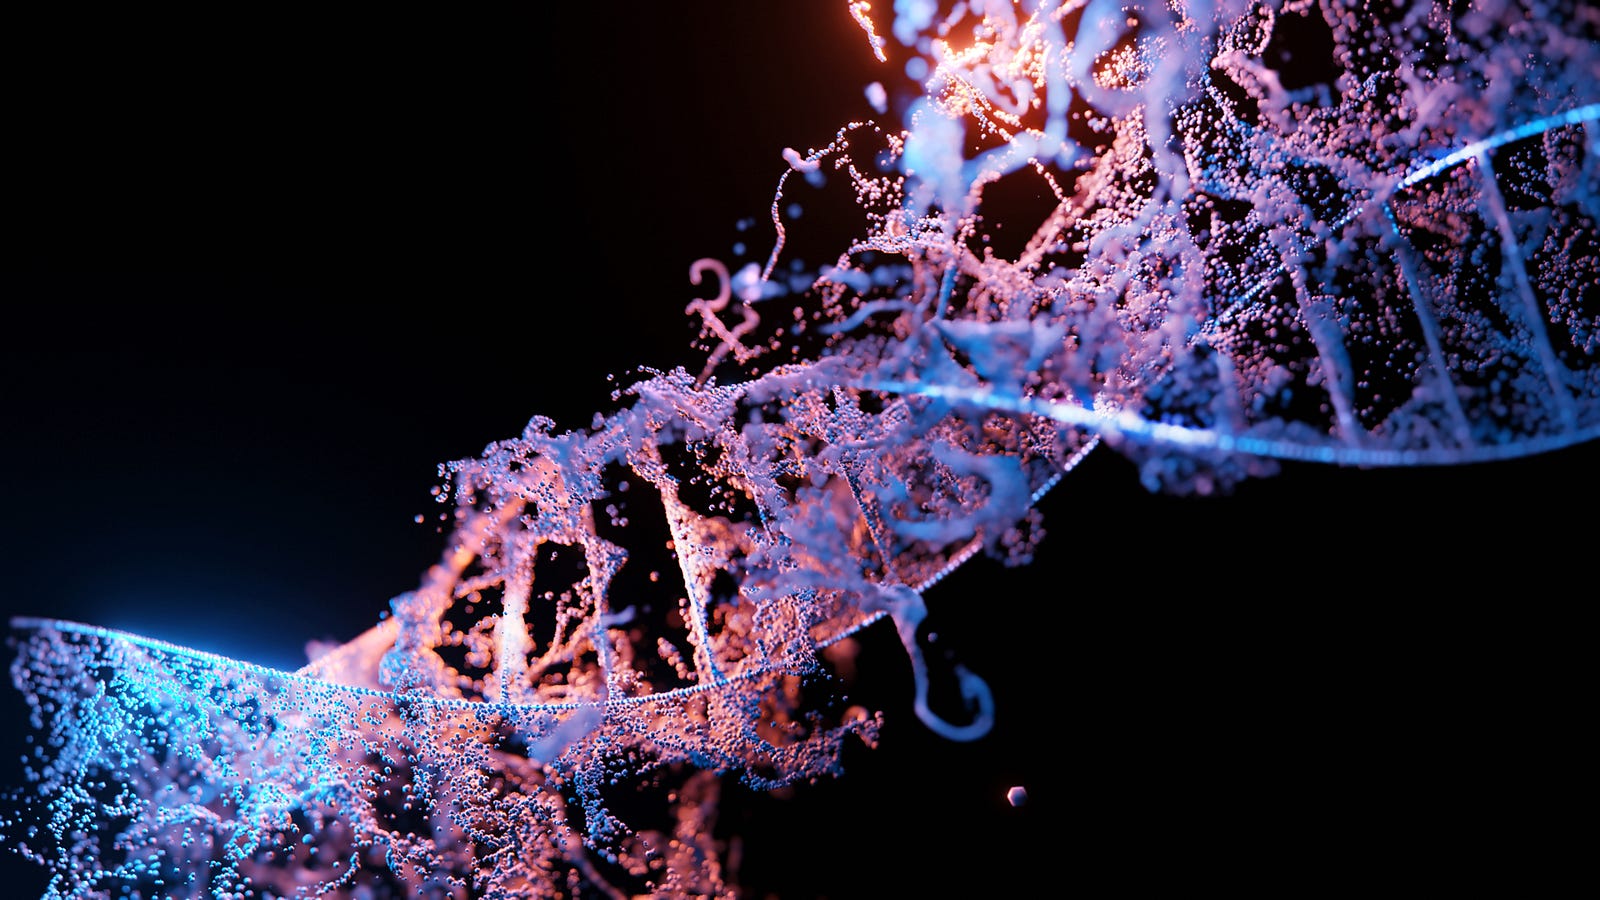 An illustration of a DNA strand, colored pink and light blue. One of the most promising applications of AI in cancer treatment is in the field of precision medicine. By analyzing a patient’s genetic profile, AI algorithms can identify targeted therapies that are most likely effective.